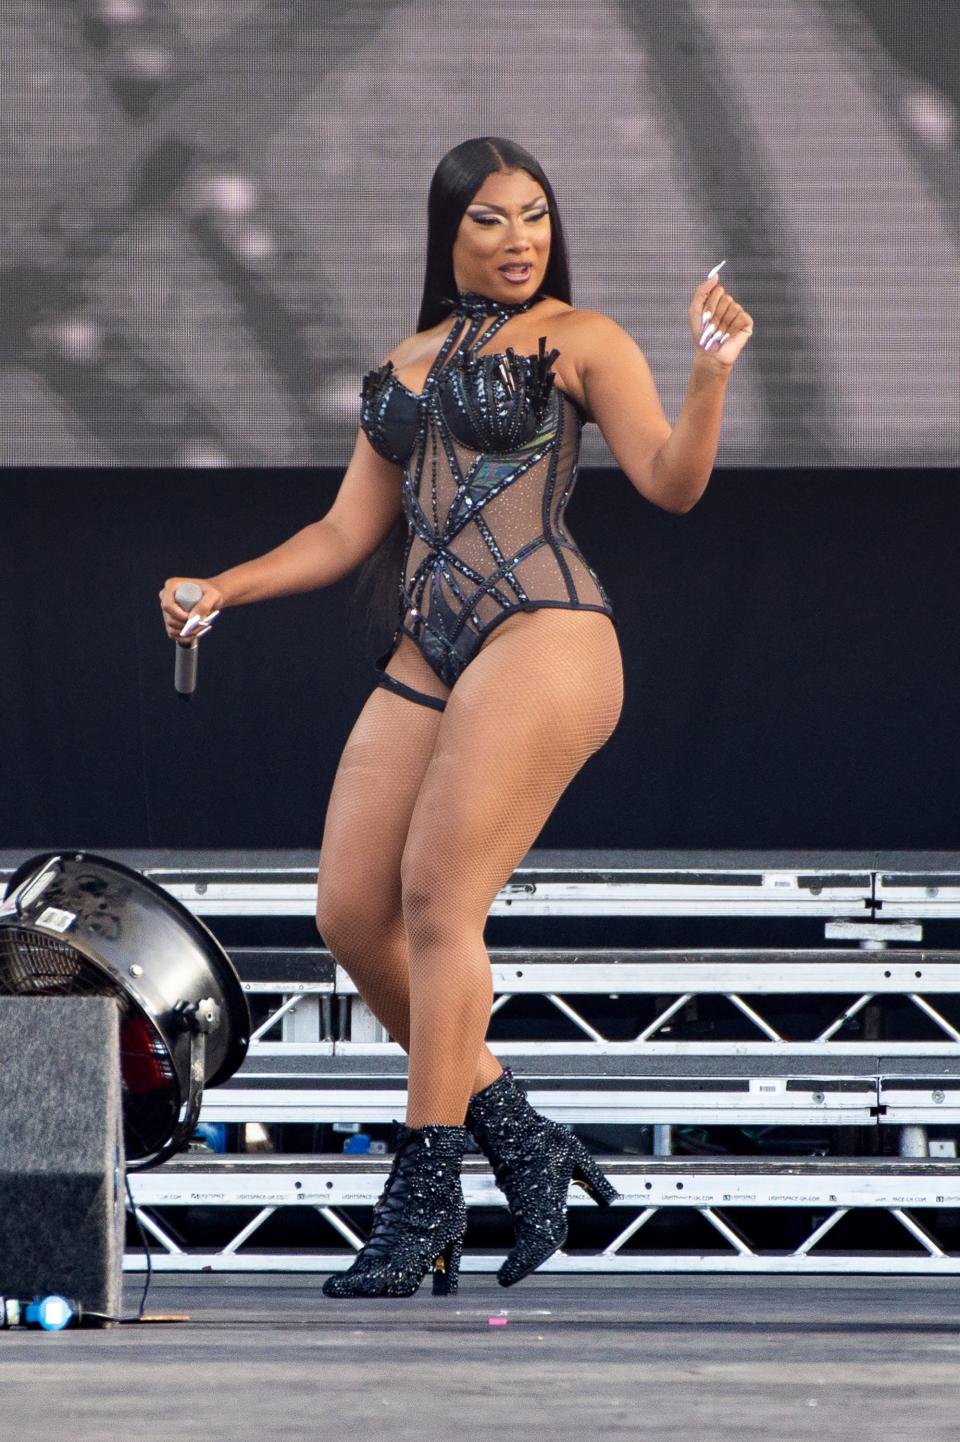 Megan Thee Stallion performs in a black corseted leotard and boots